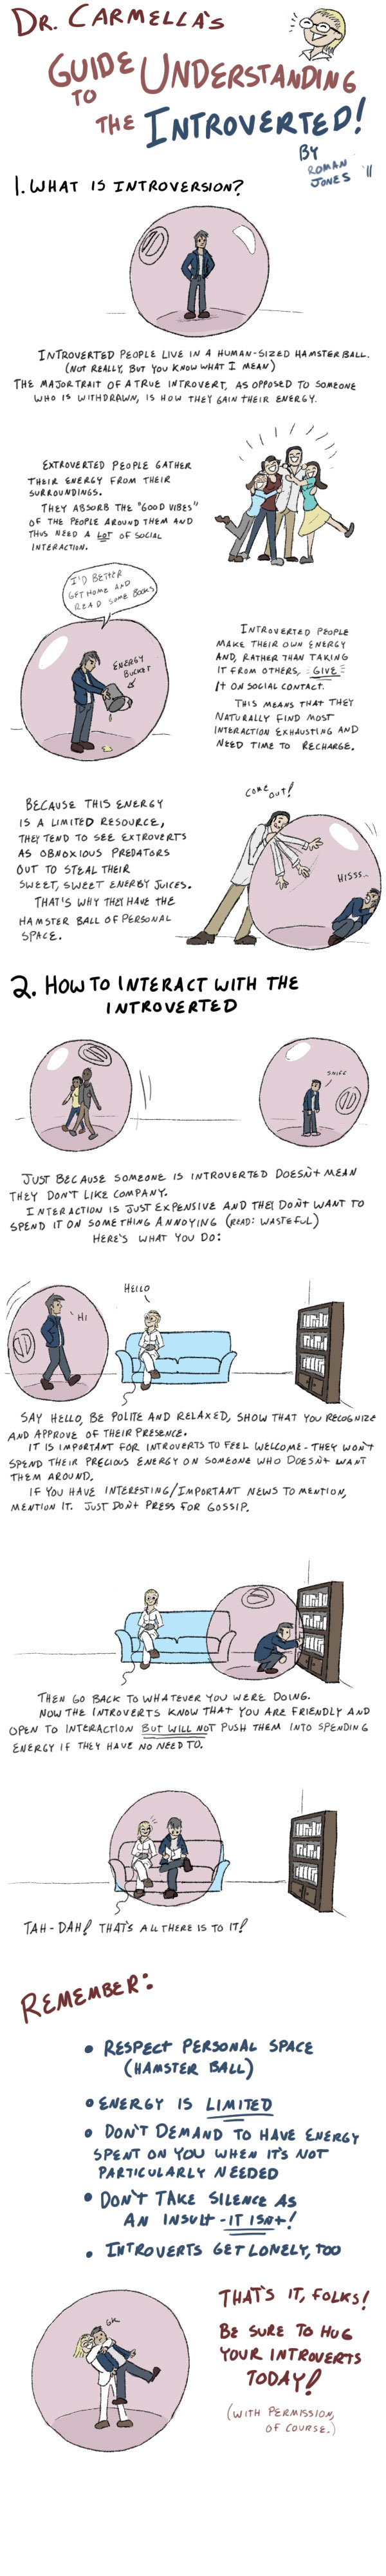 how_to_live_with_introverts_by_romanjones-d4tfoyo